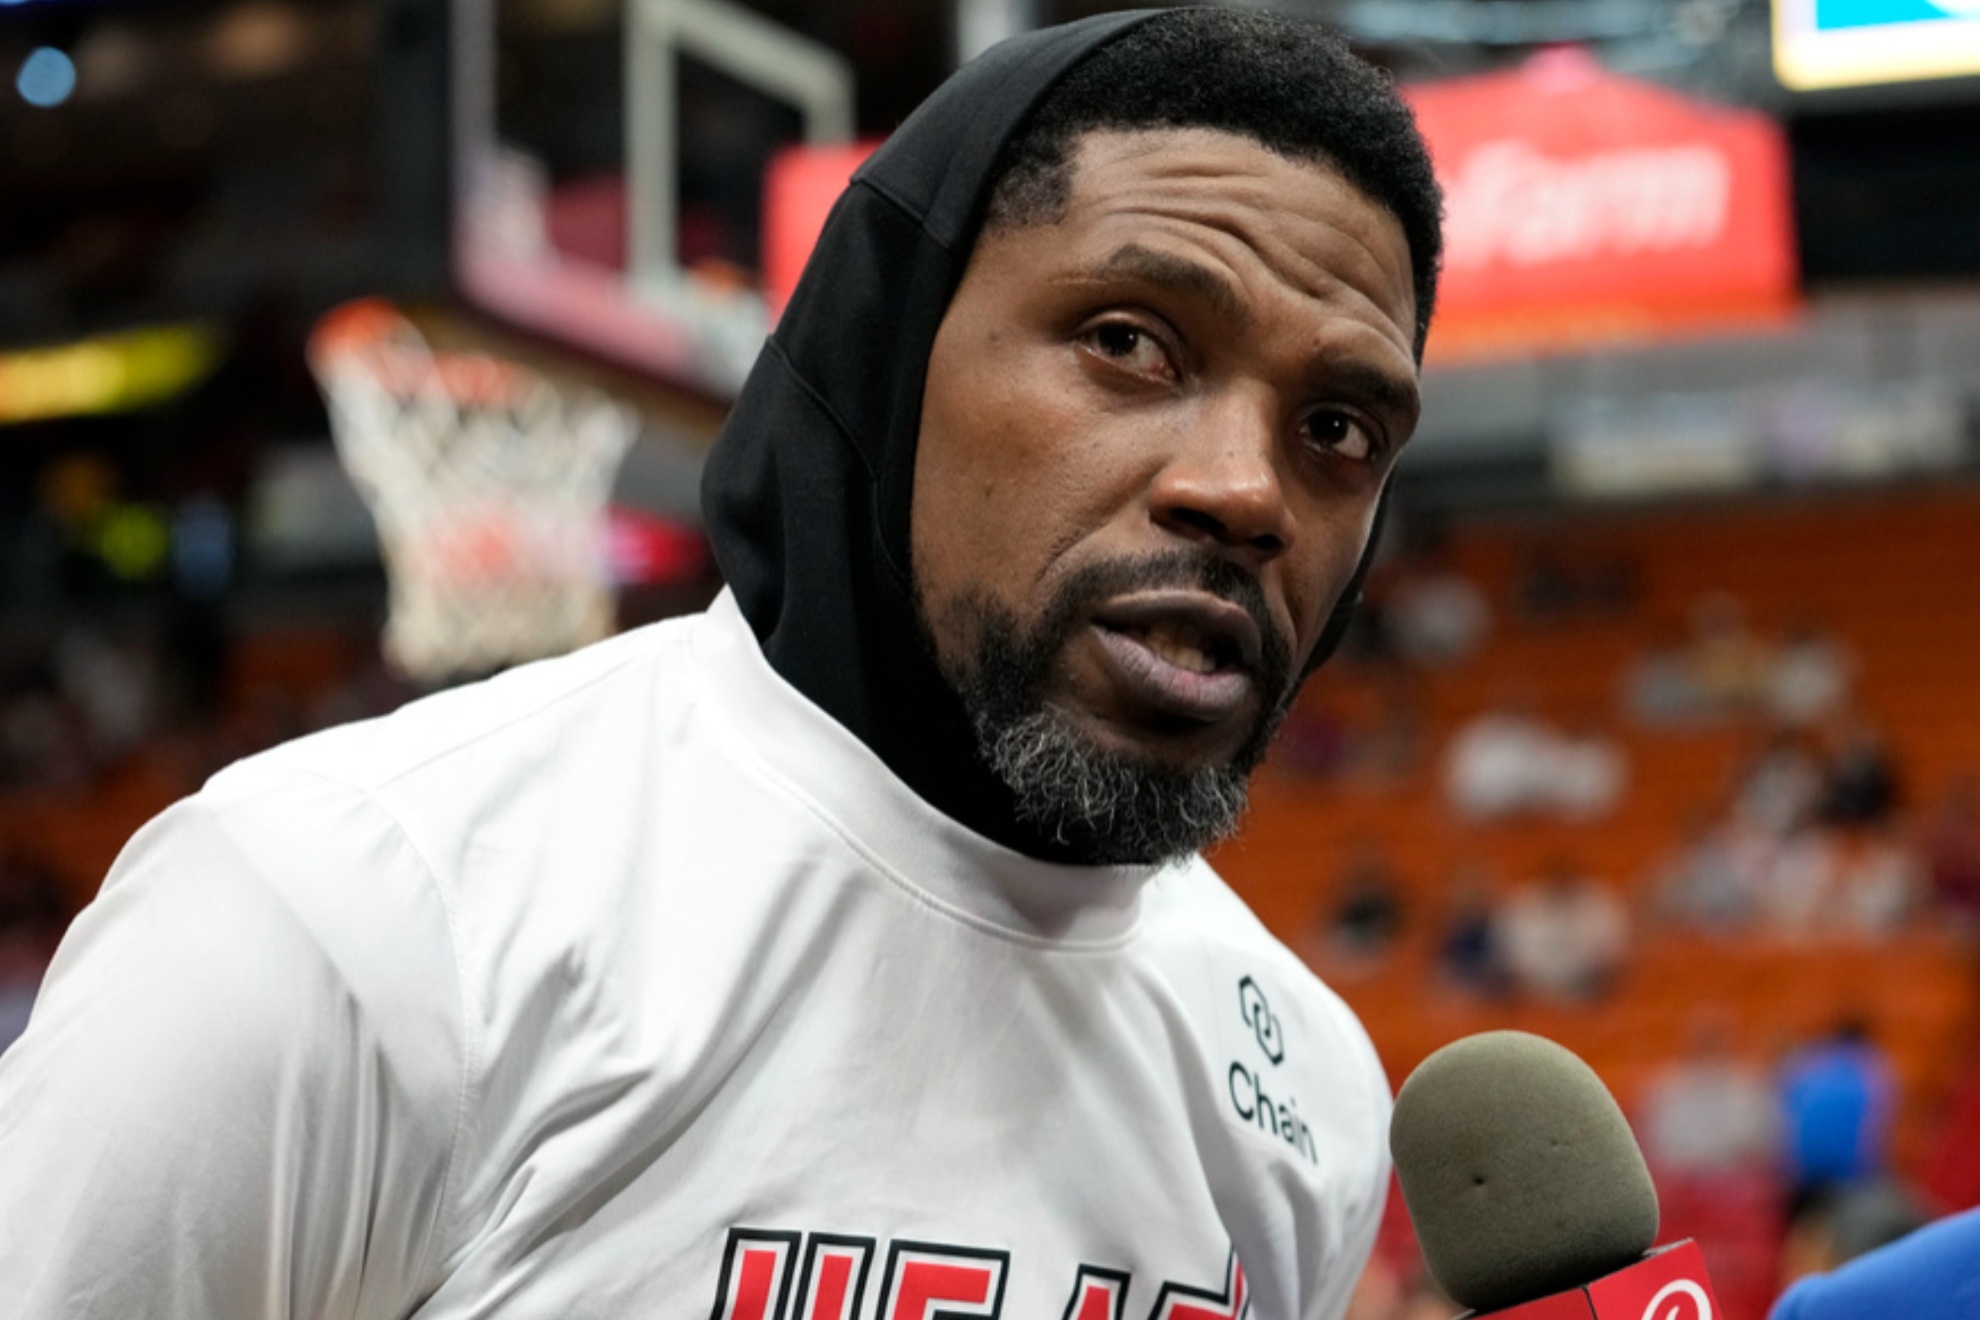 Udonis Haslem of the Miami Heat, announced his retirement after 20 seasons in the NBA